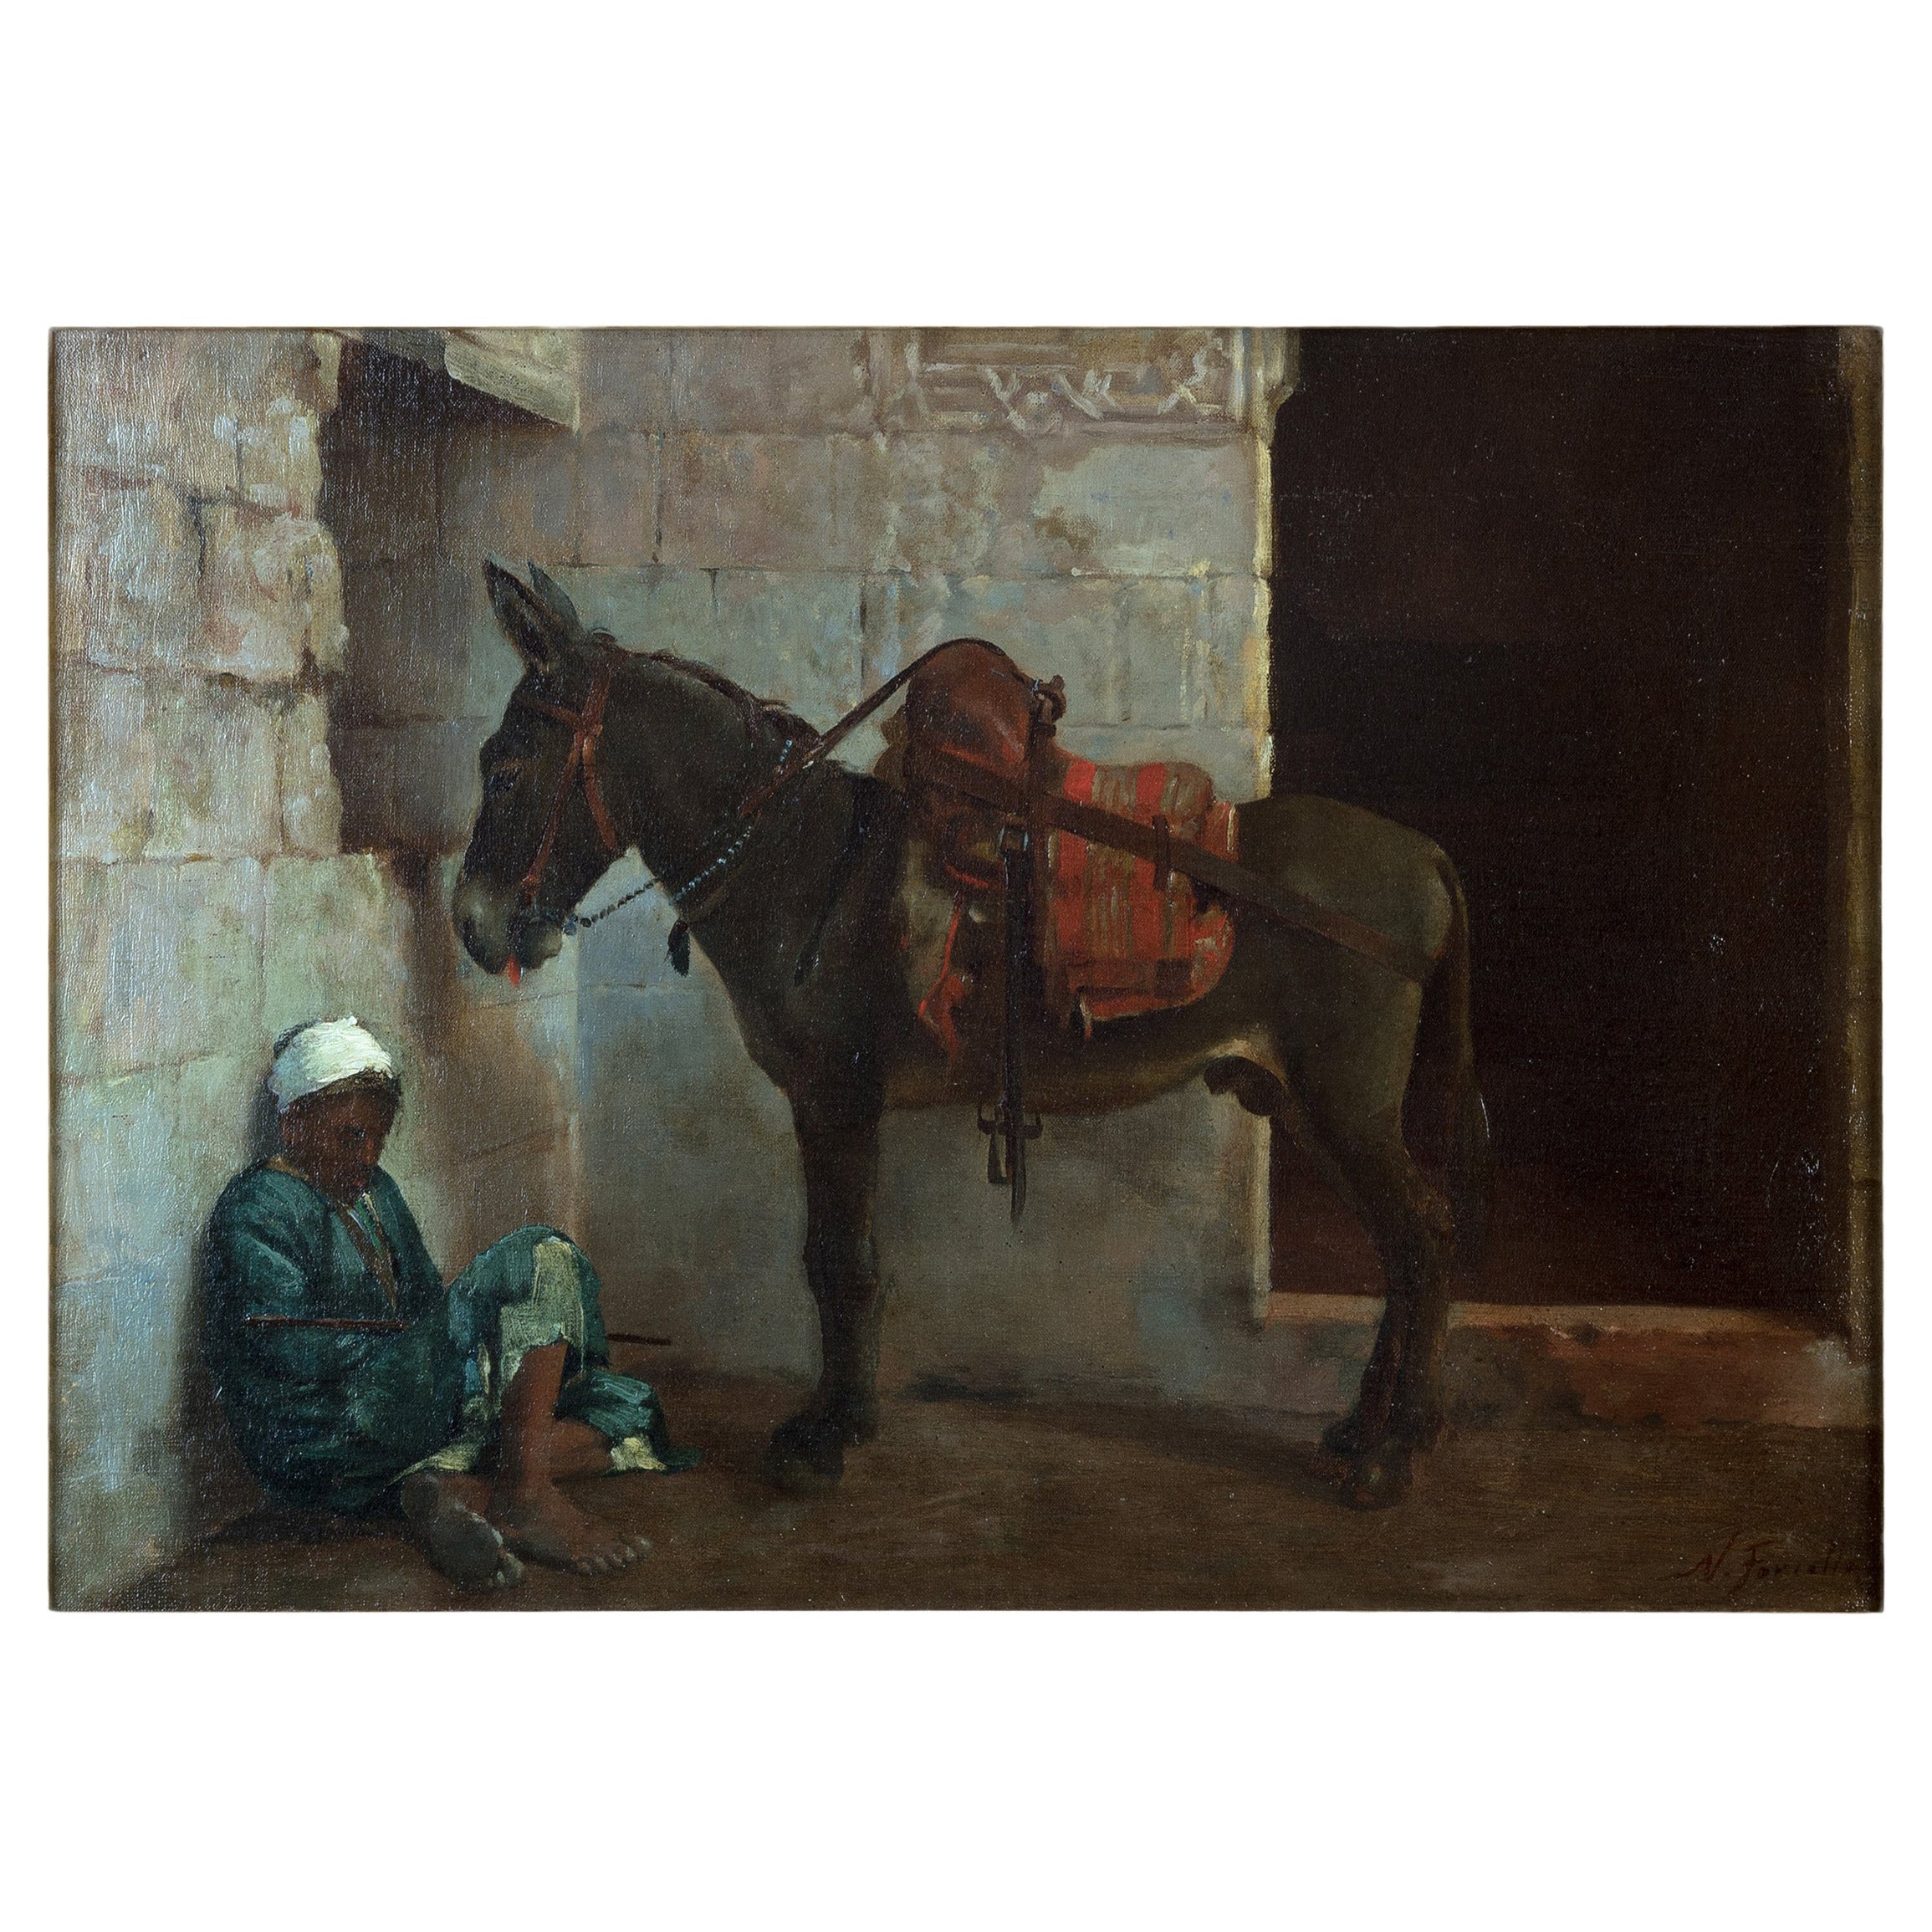 Fine Orientalist Painting of a Young Boy with Donkey by Nicola Forcella